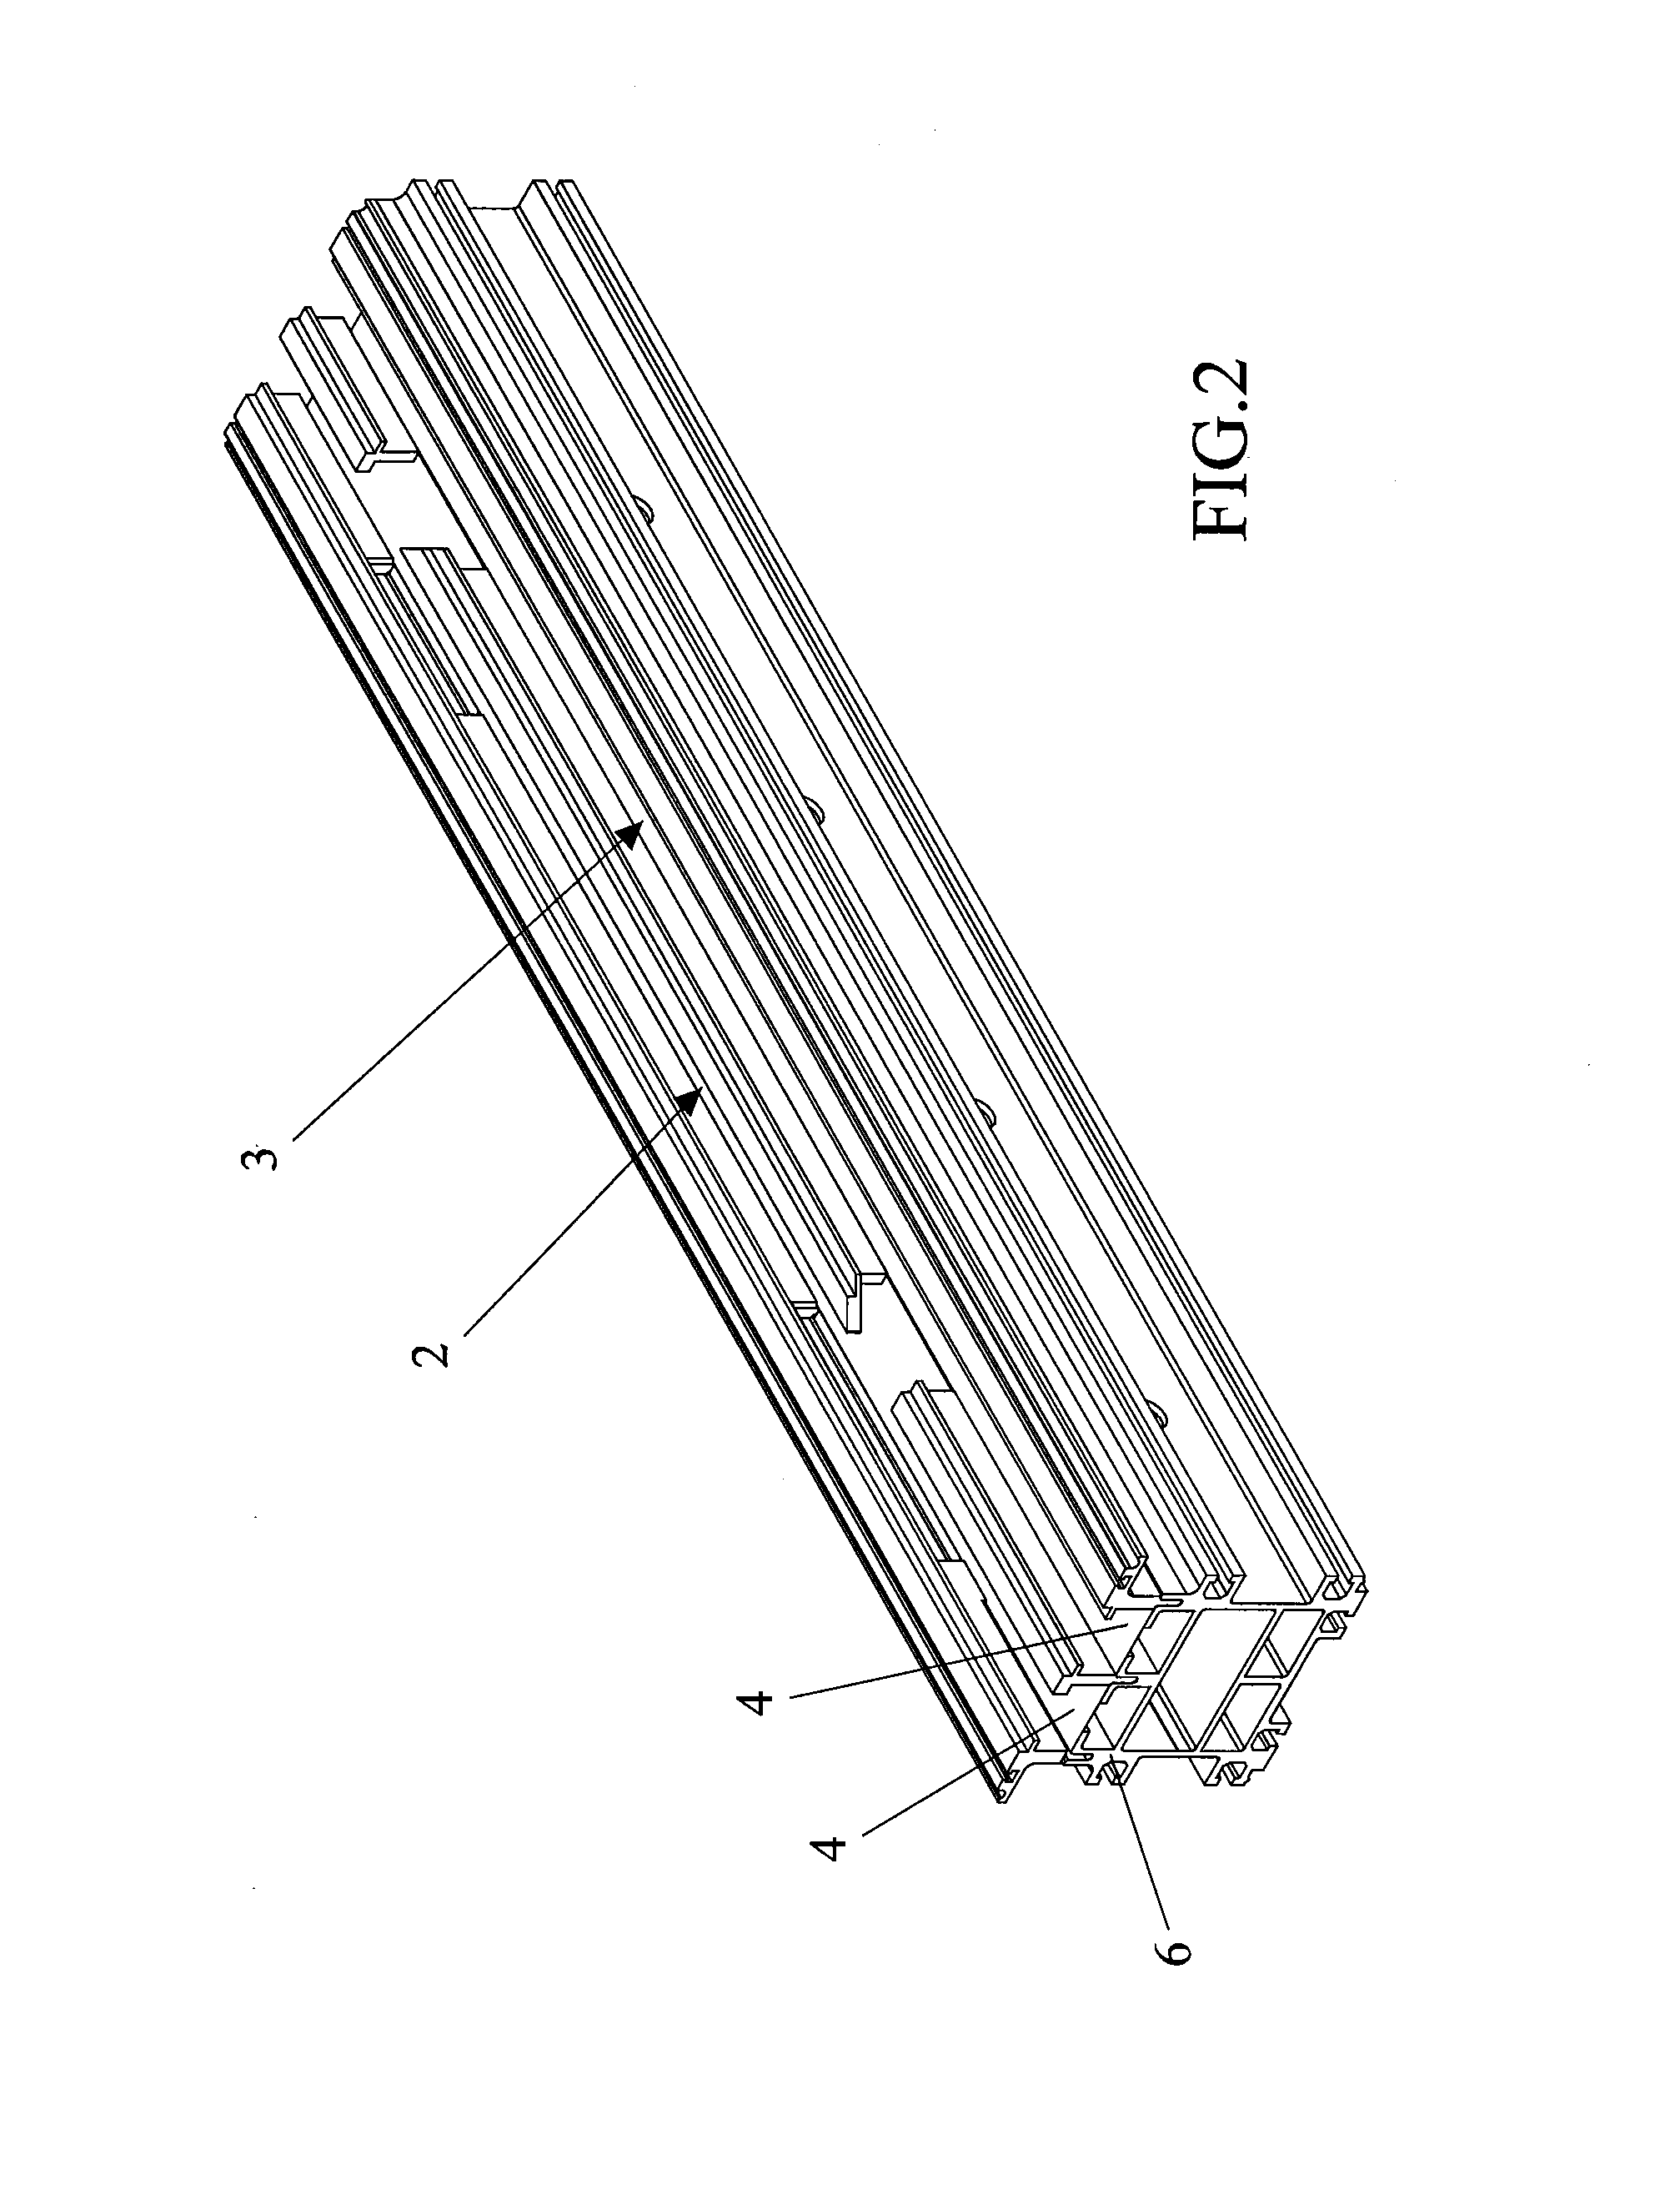 Laboratory automation system with double motor traction device for conveyor belts